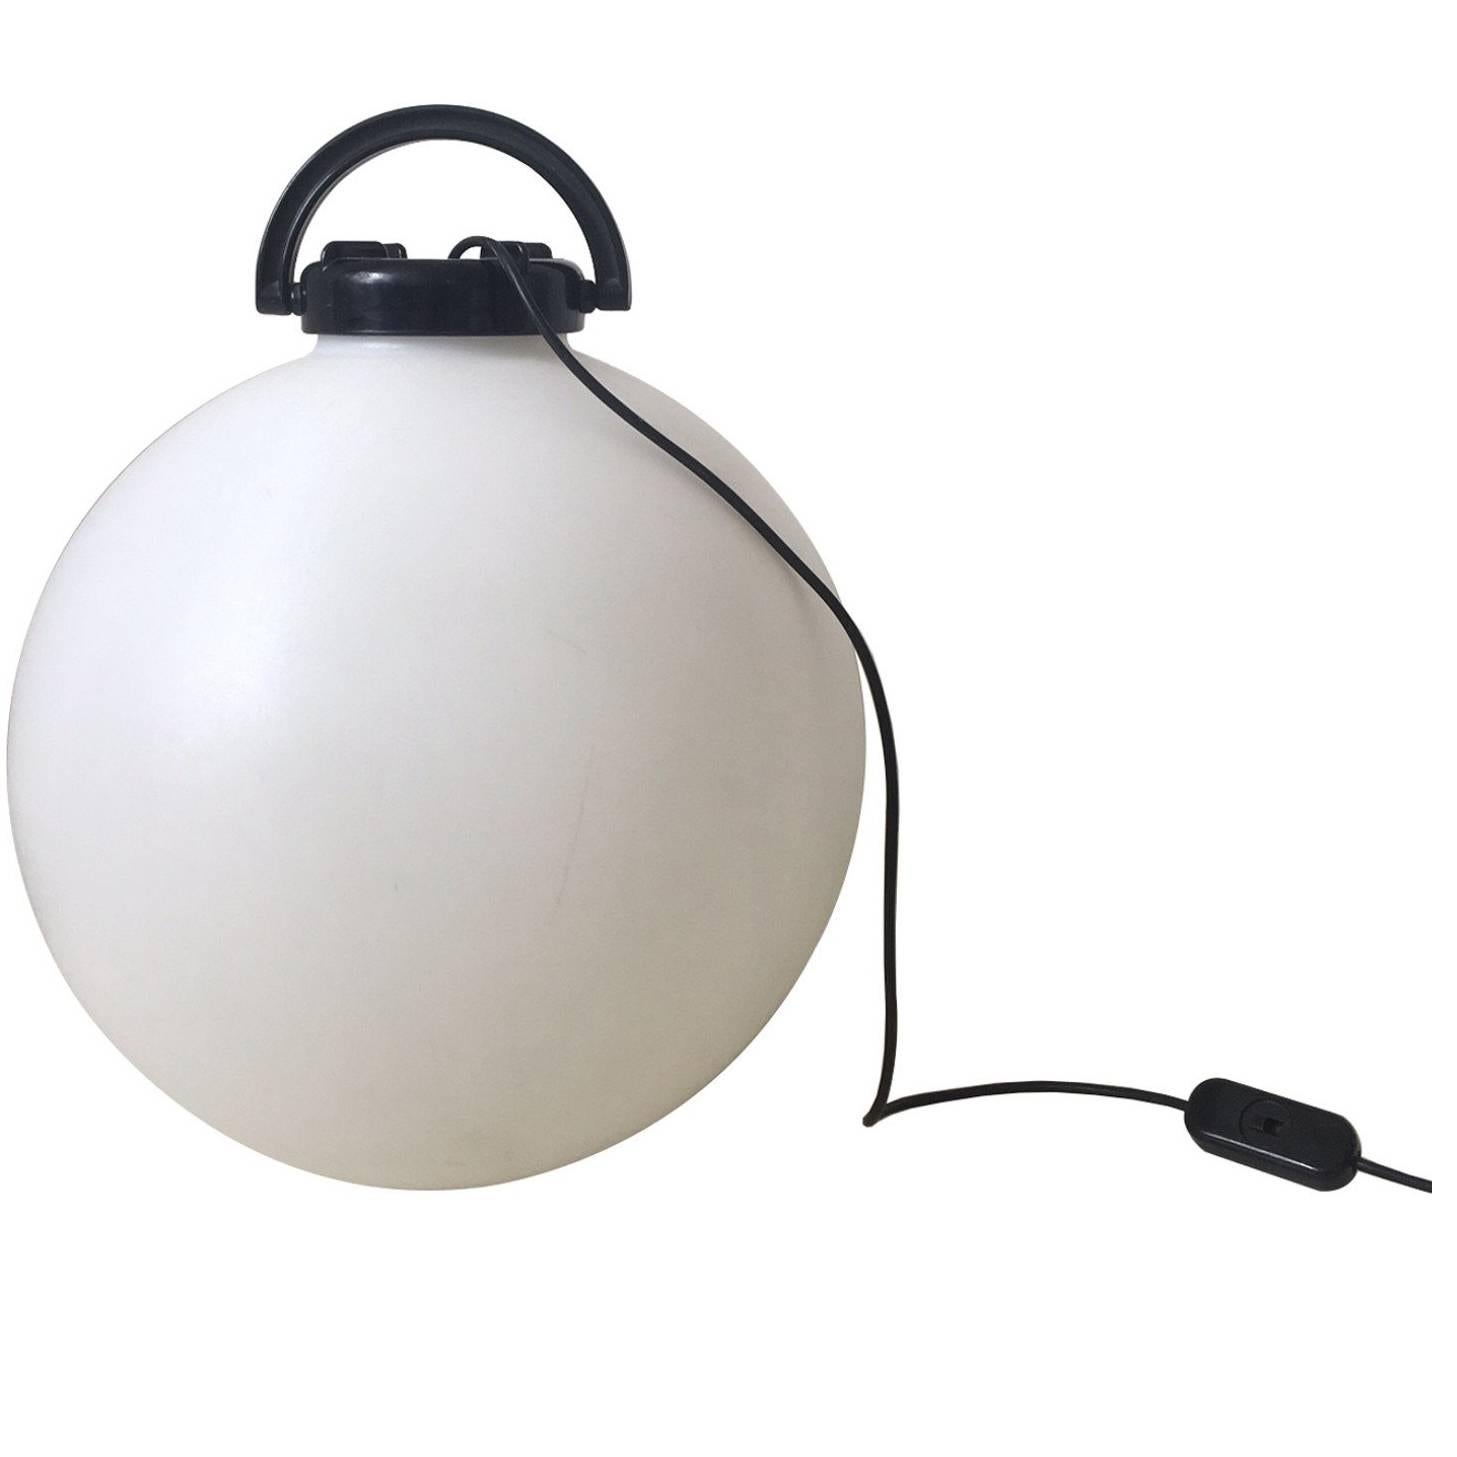 'Tama' Black and White Floor Lamp by Isao Hosoe for Valenti, 1975 For Sale